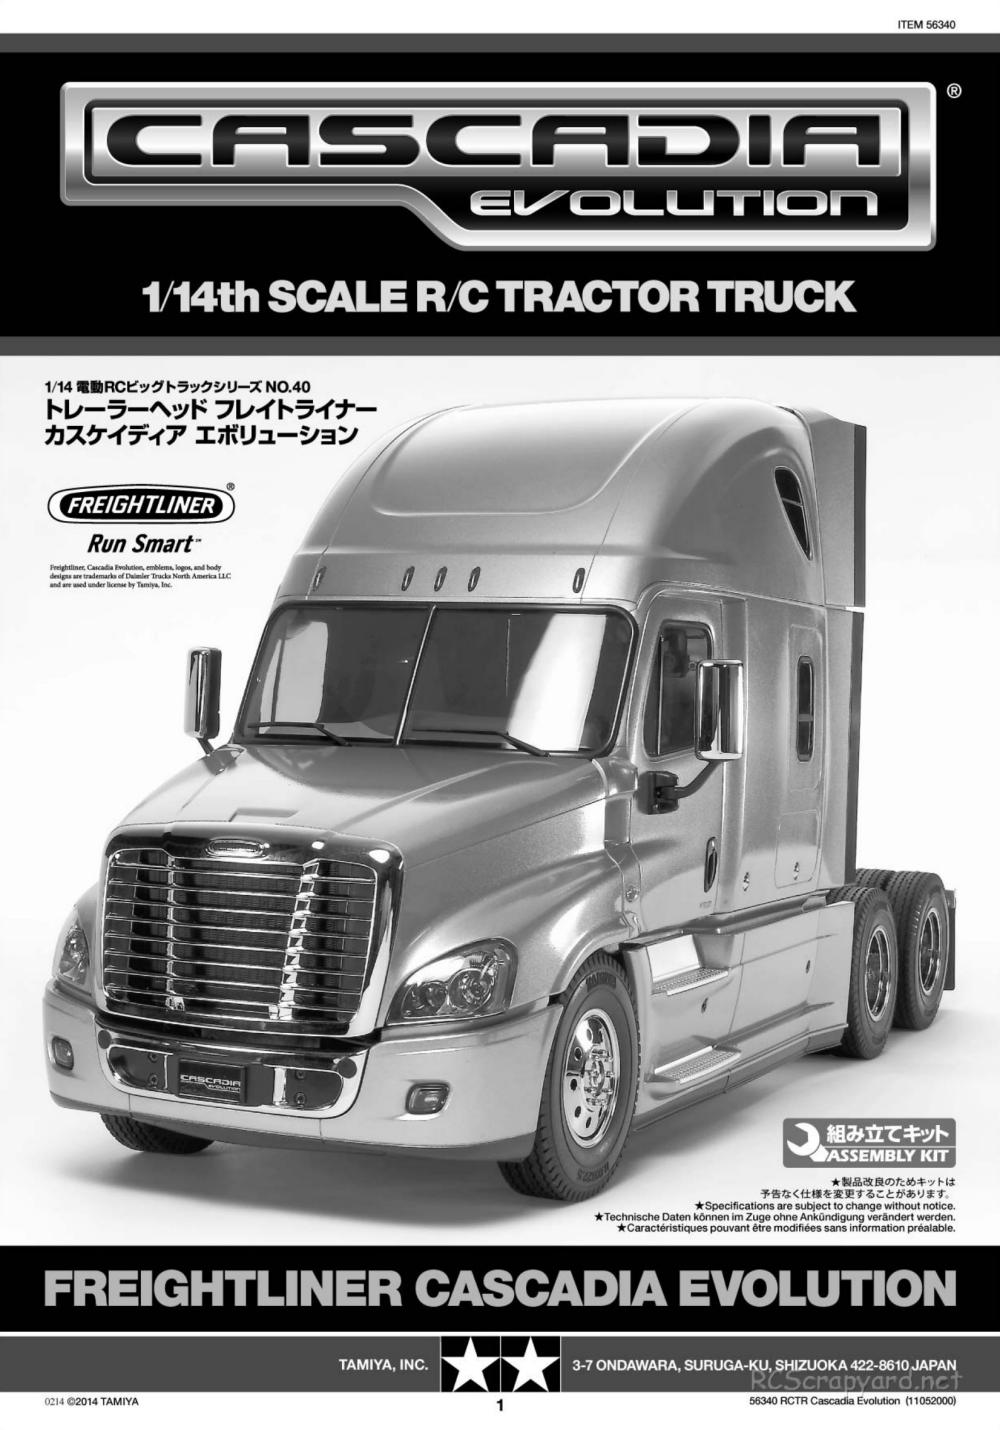 Tamiya - Freightliner Cascadia Evolution Tractor Truck Chassis - Manual - Page 1